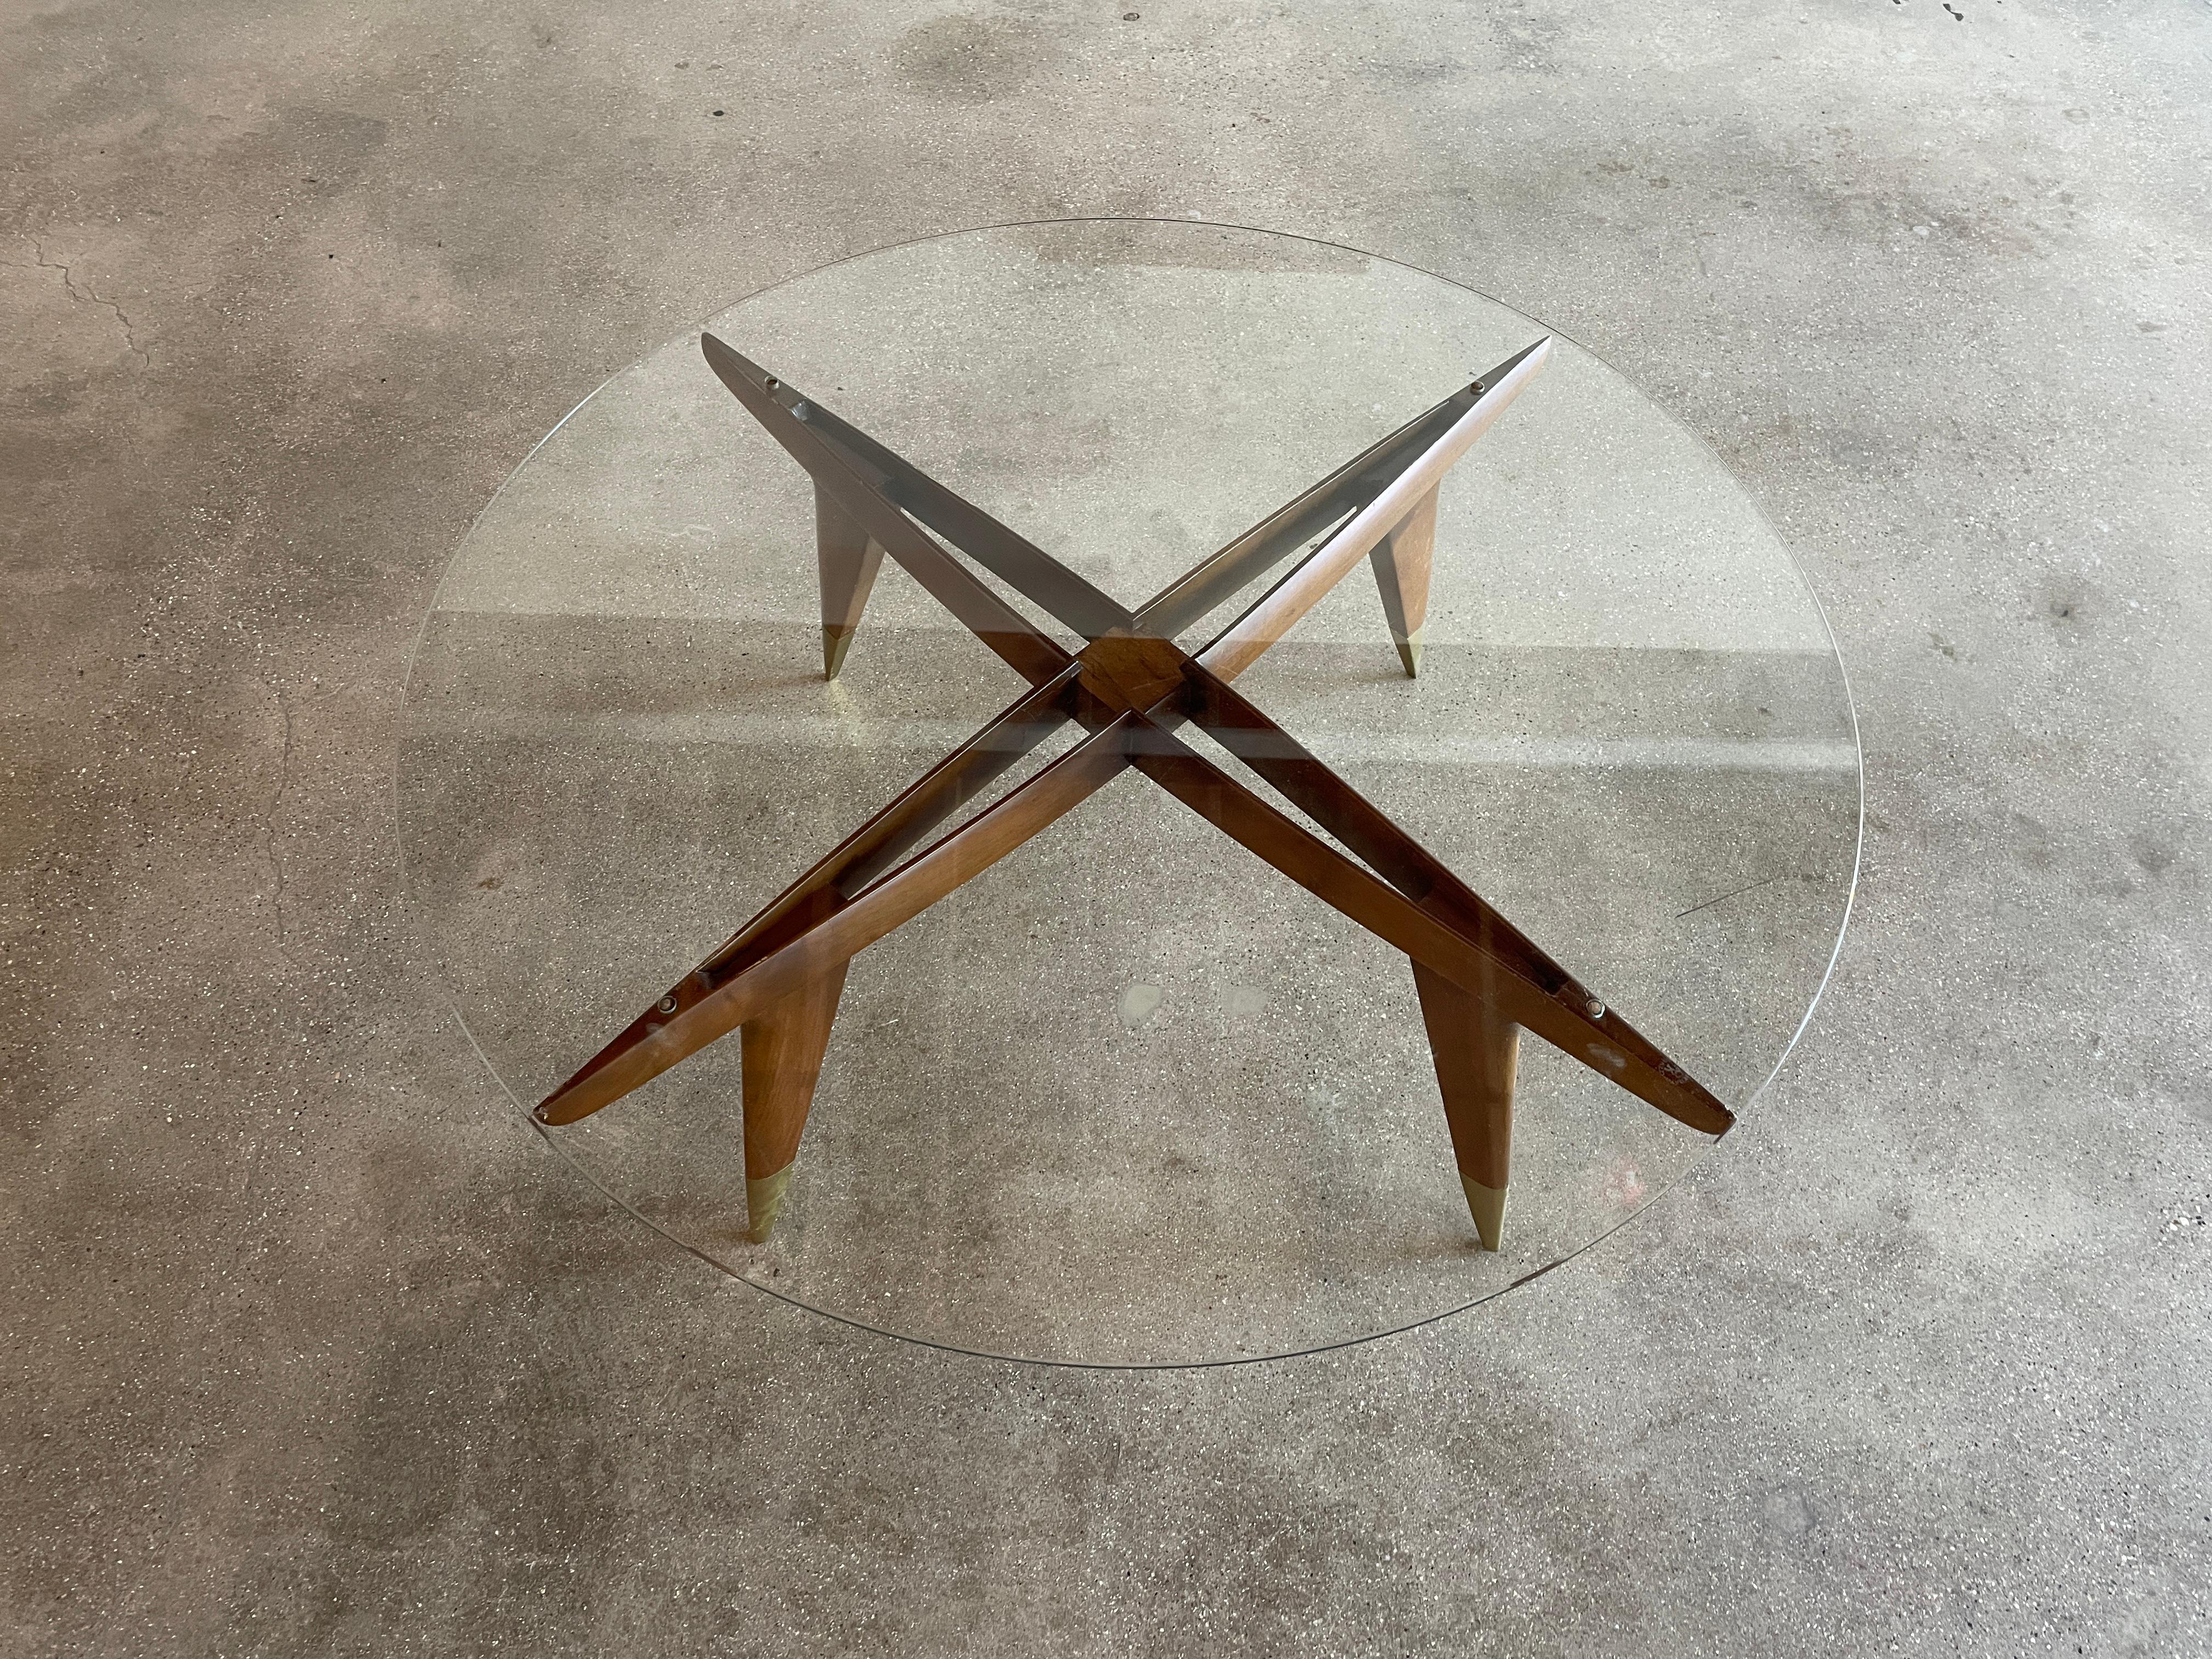 Iconic and rare model 1101 coffee table designed by architect Gio Ponti for M. Singer & Sons, New York, America circa, 1950. The coffee table features distinctive brass feet and is in very good vintage condition. The table retains original tempered